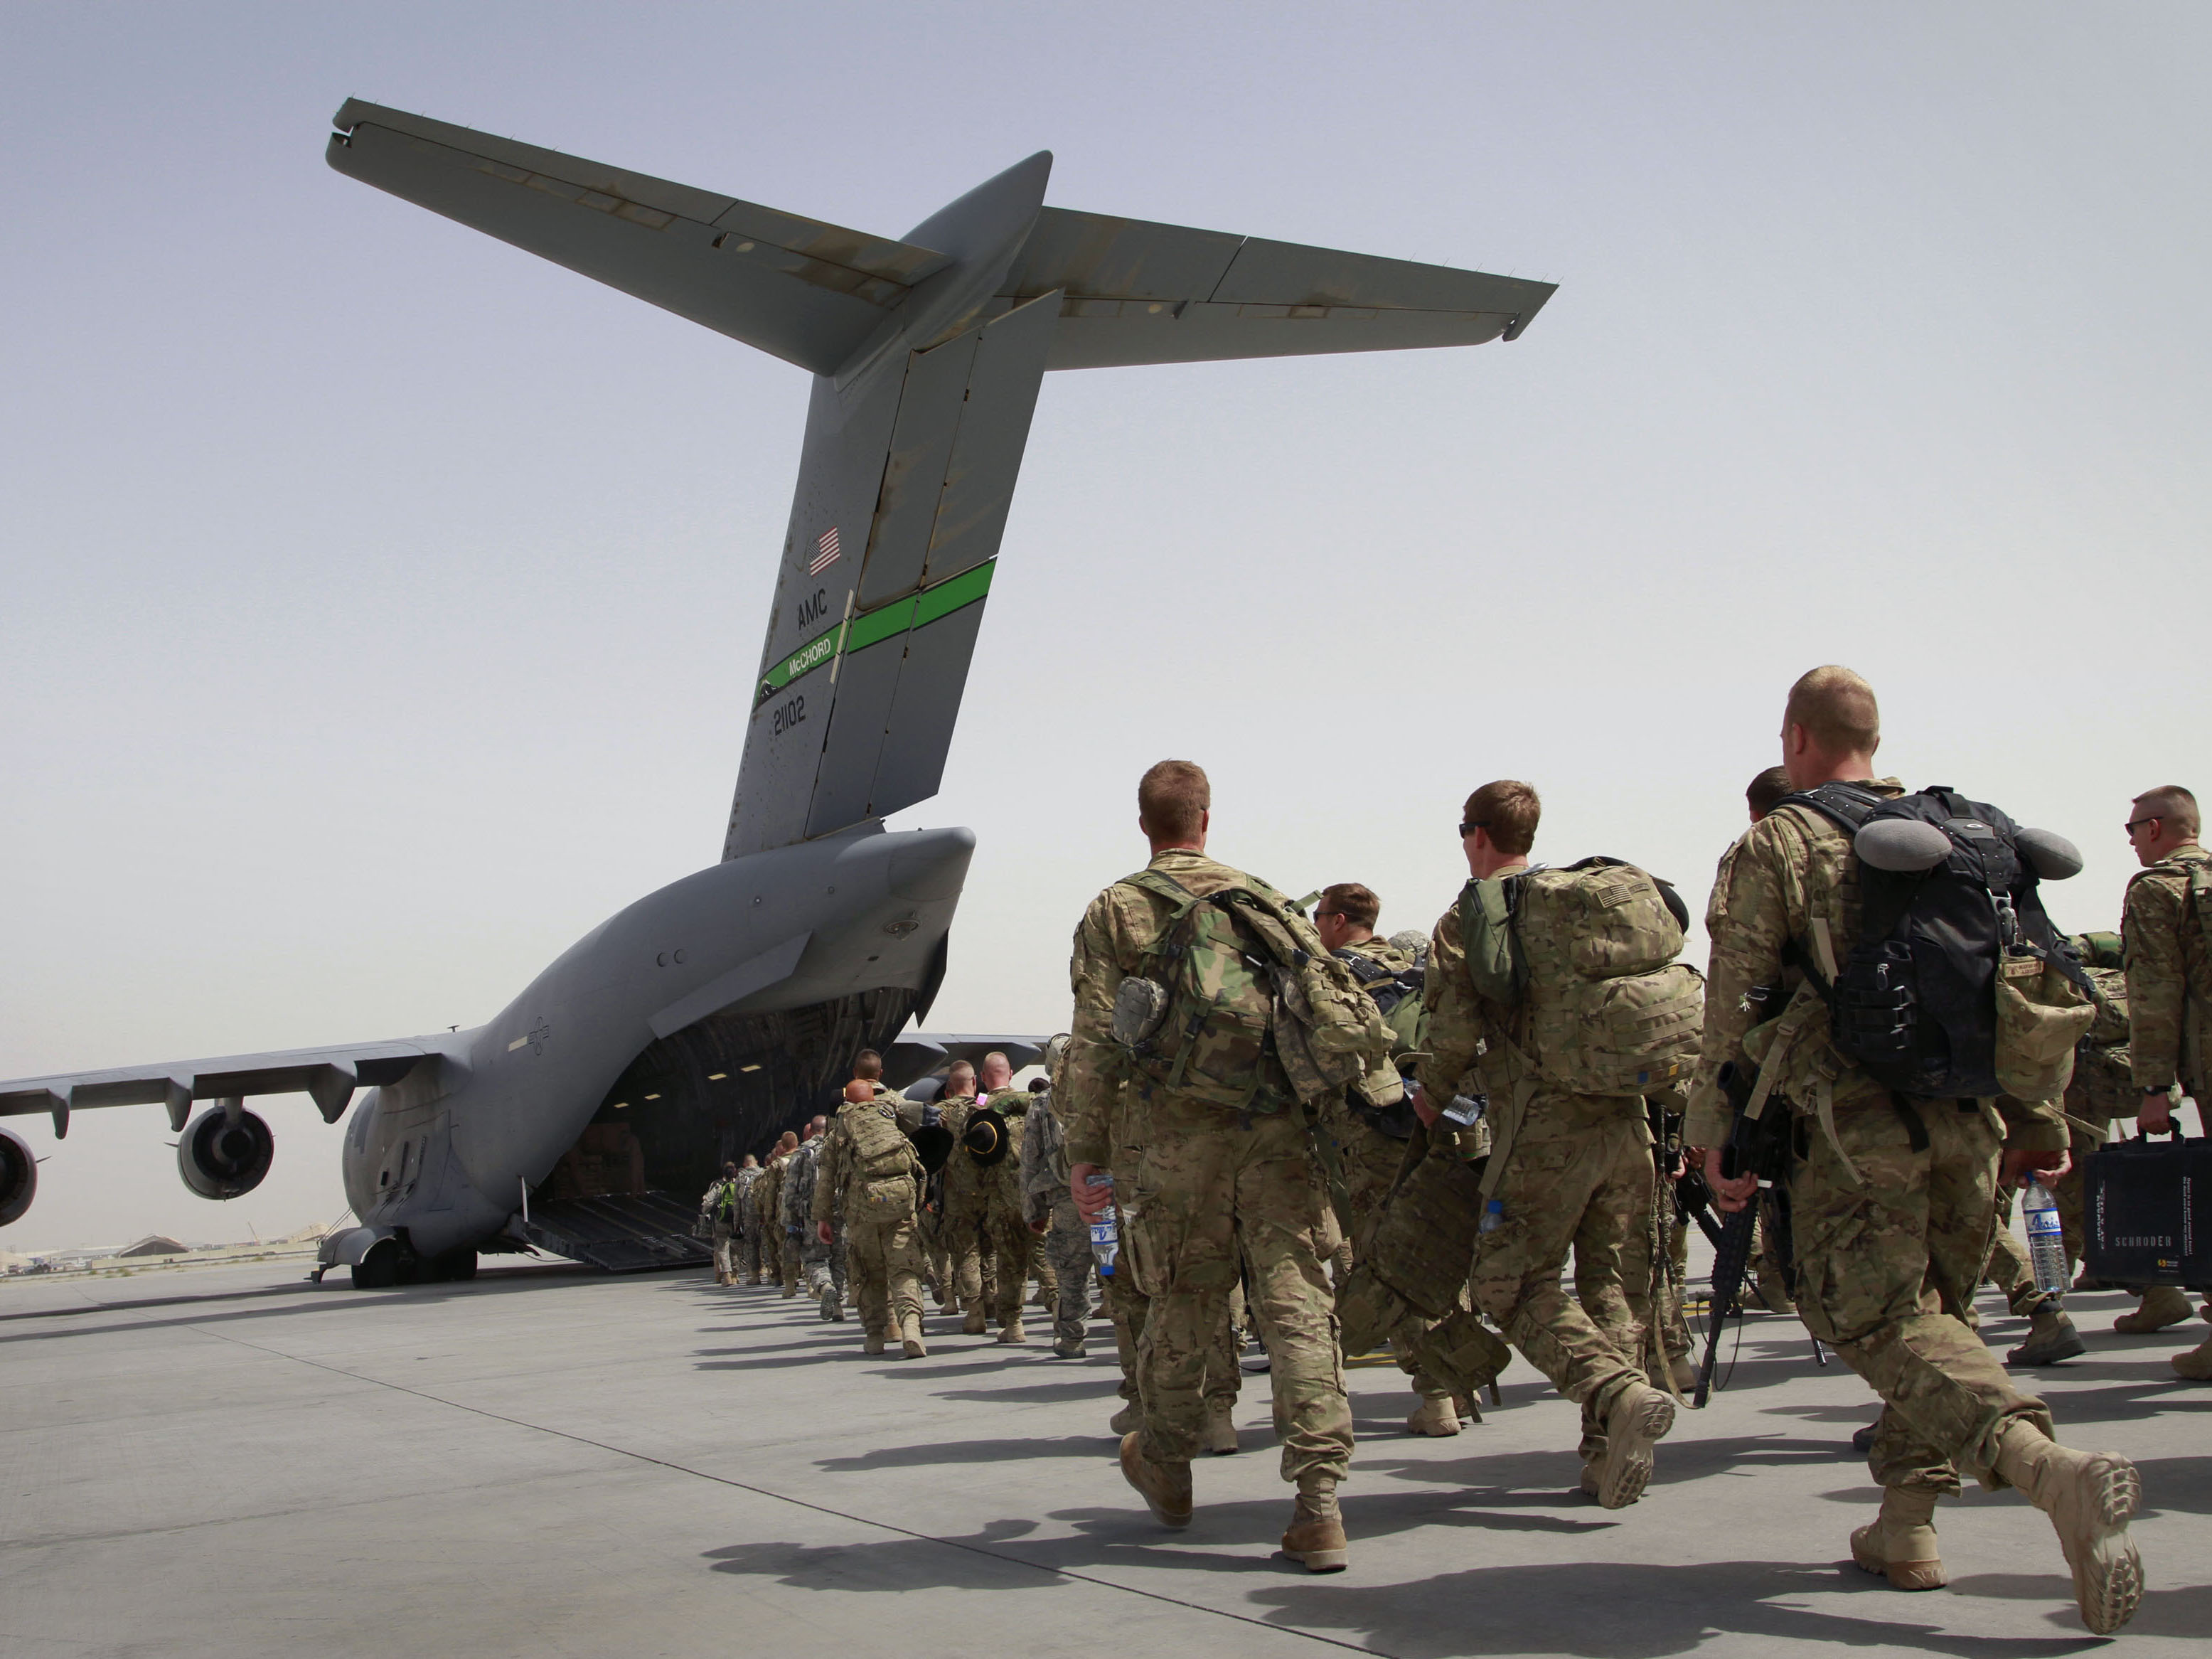 The war in Afghan cost US 300 million dollars per day for 20 years